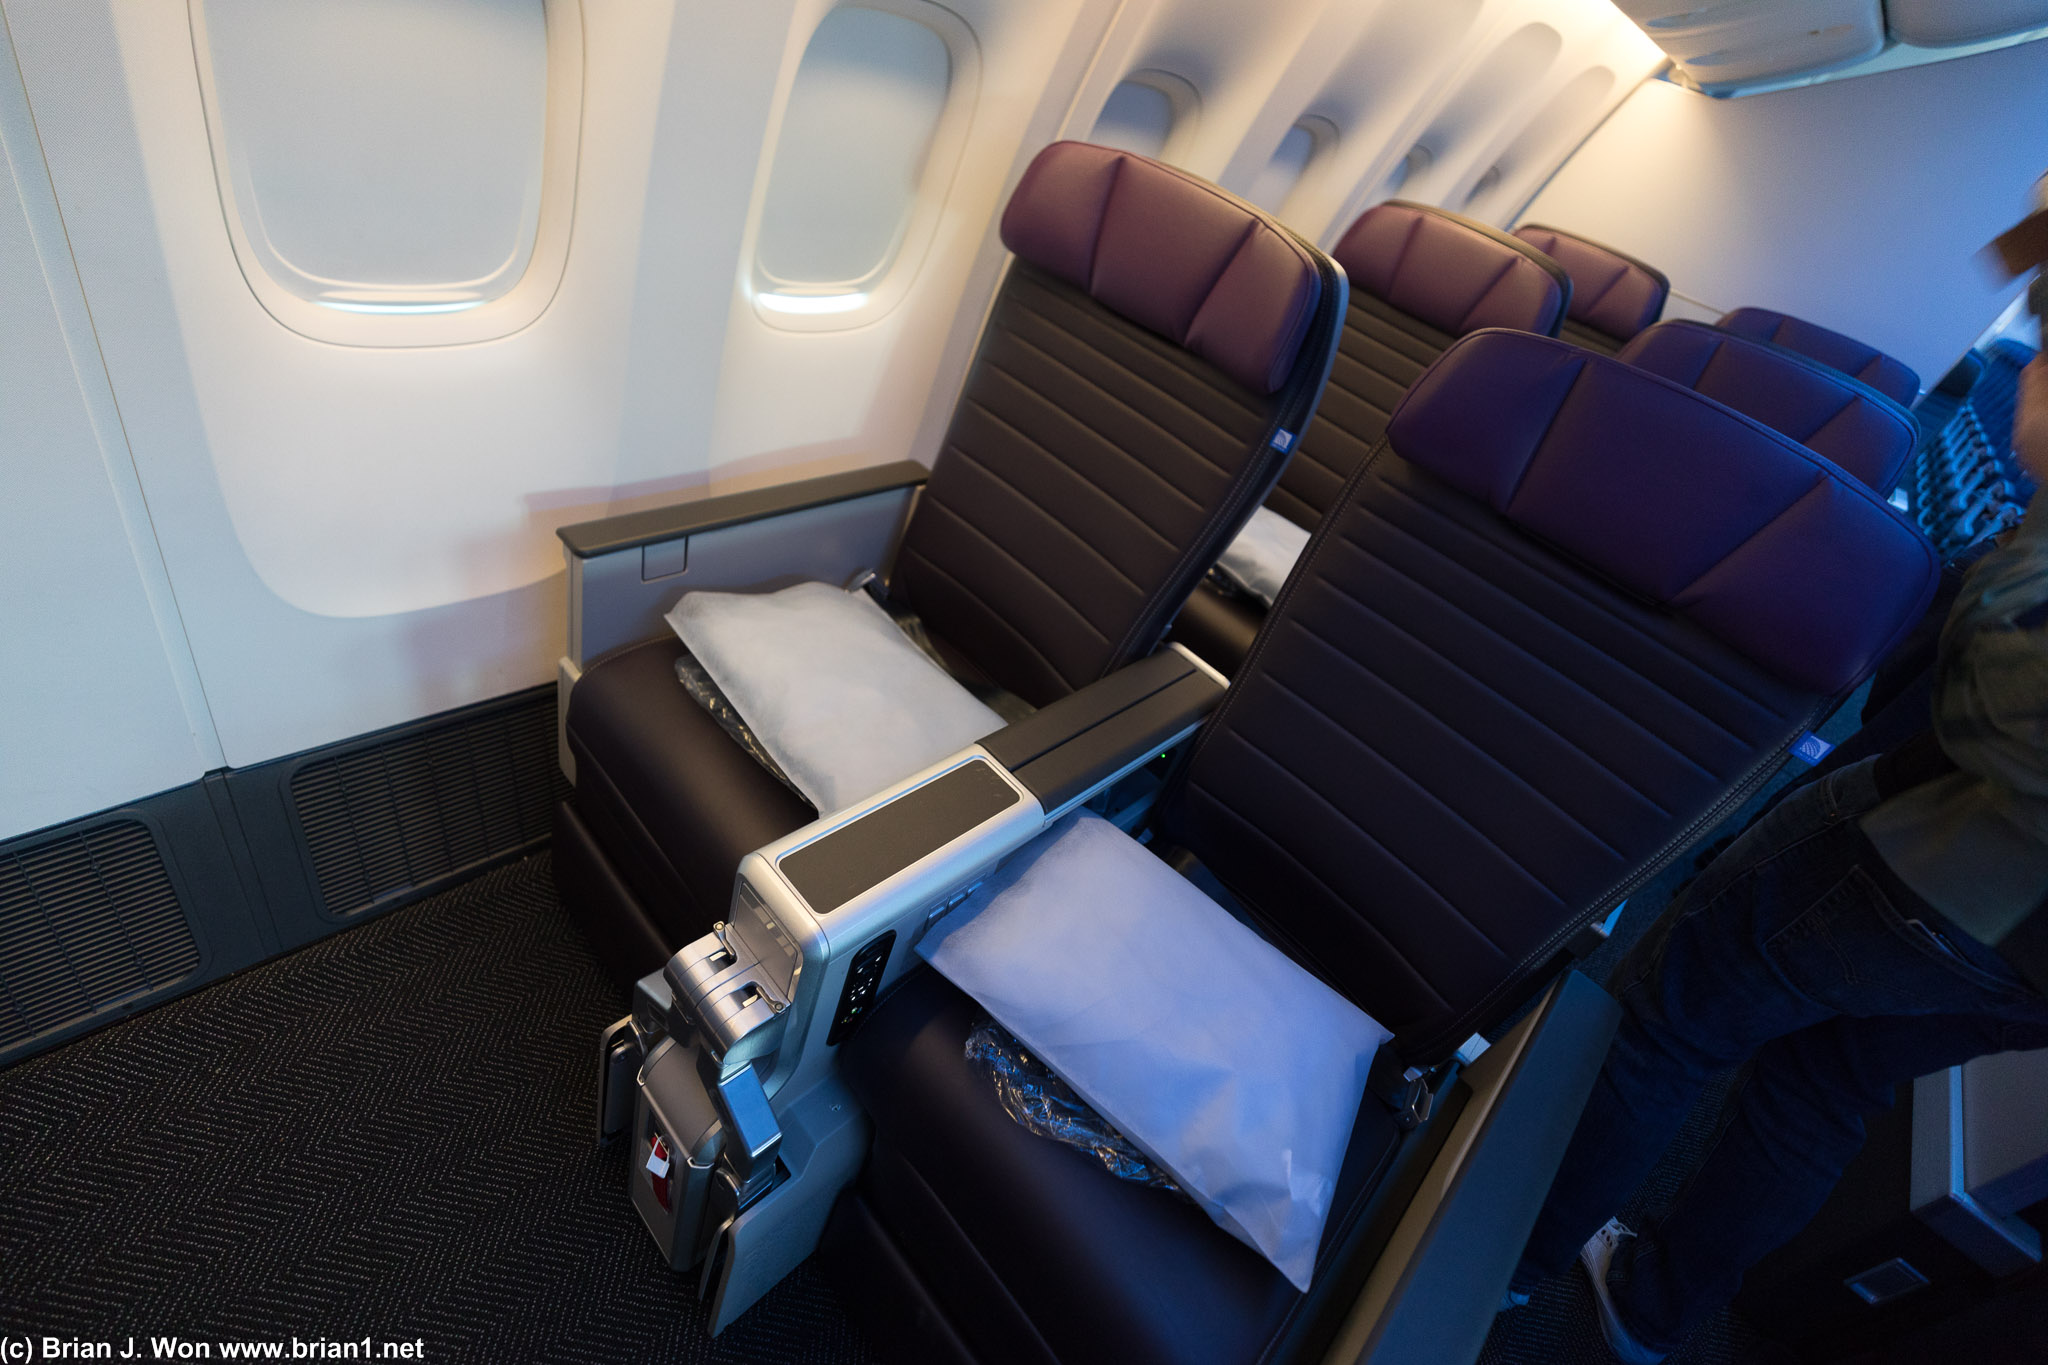 Looks about the same as the 787's premium economy cabin.